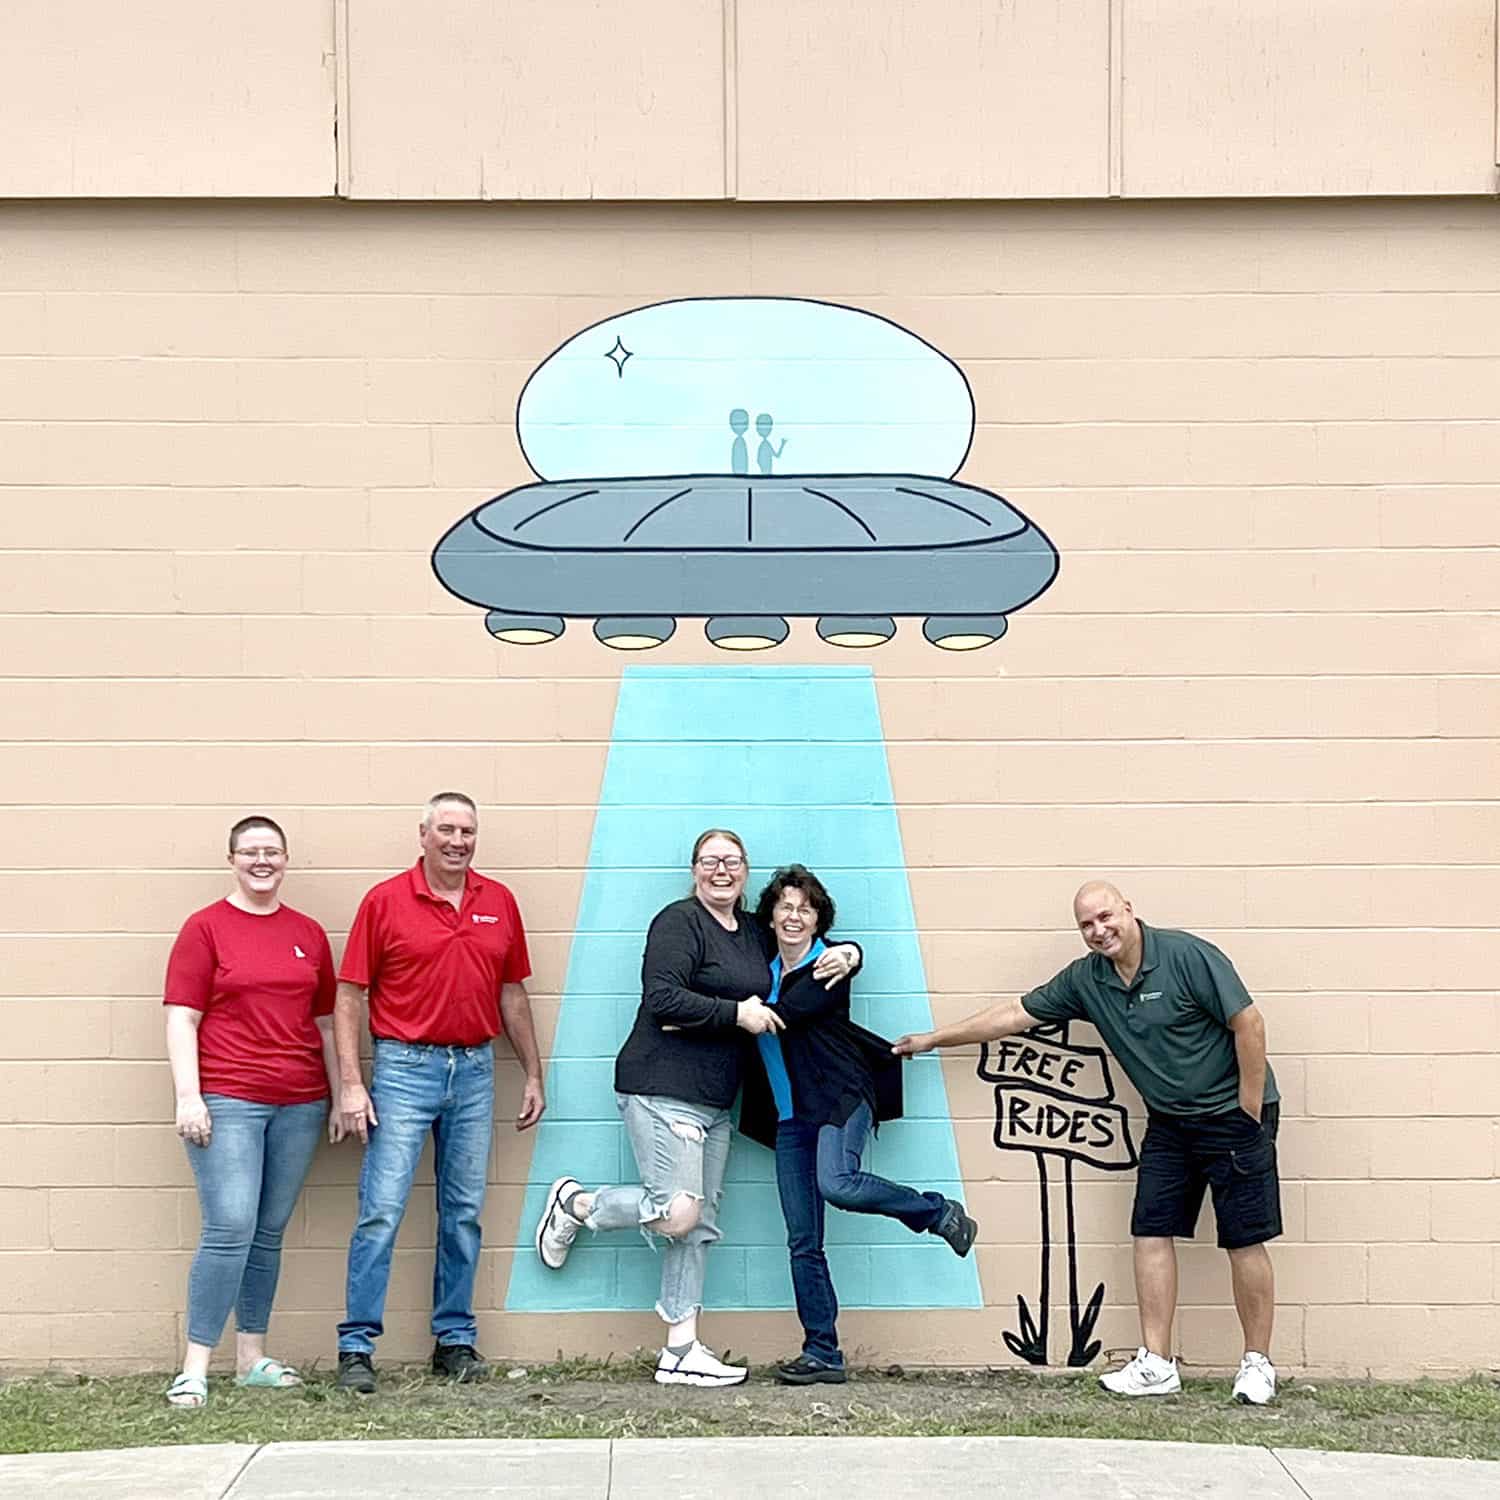 Precision Printing of MN staff standing in front of the "Free Rides" UFO mural • Precision Printing building • Artist: Hannah Spry